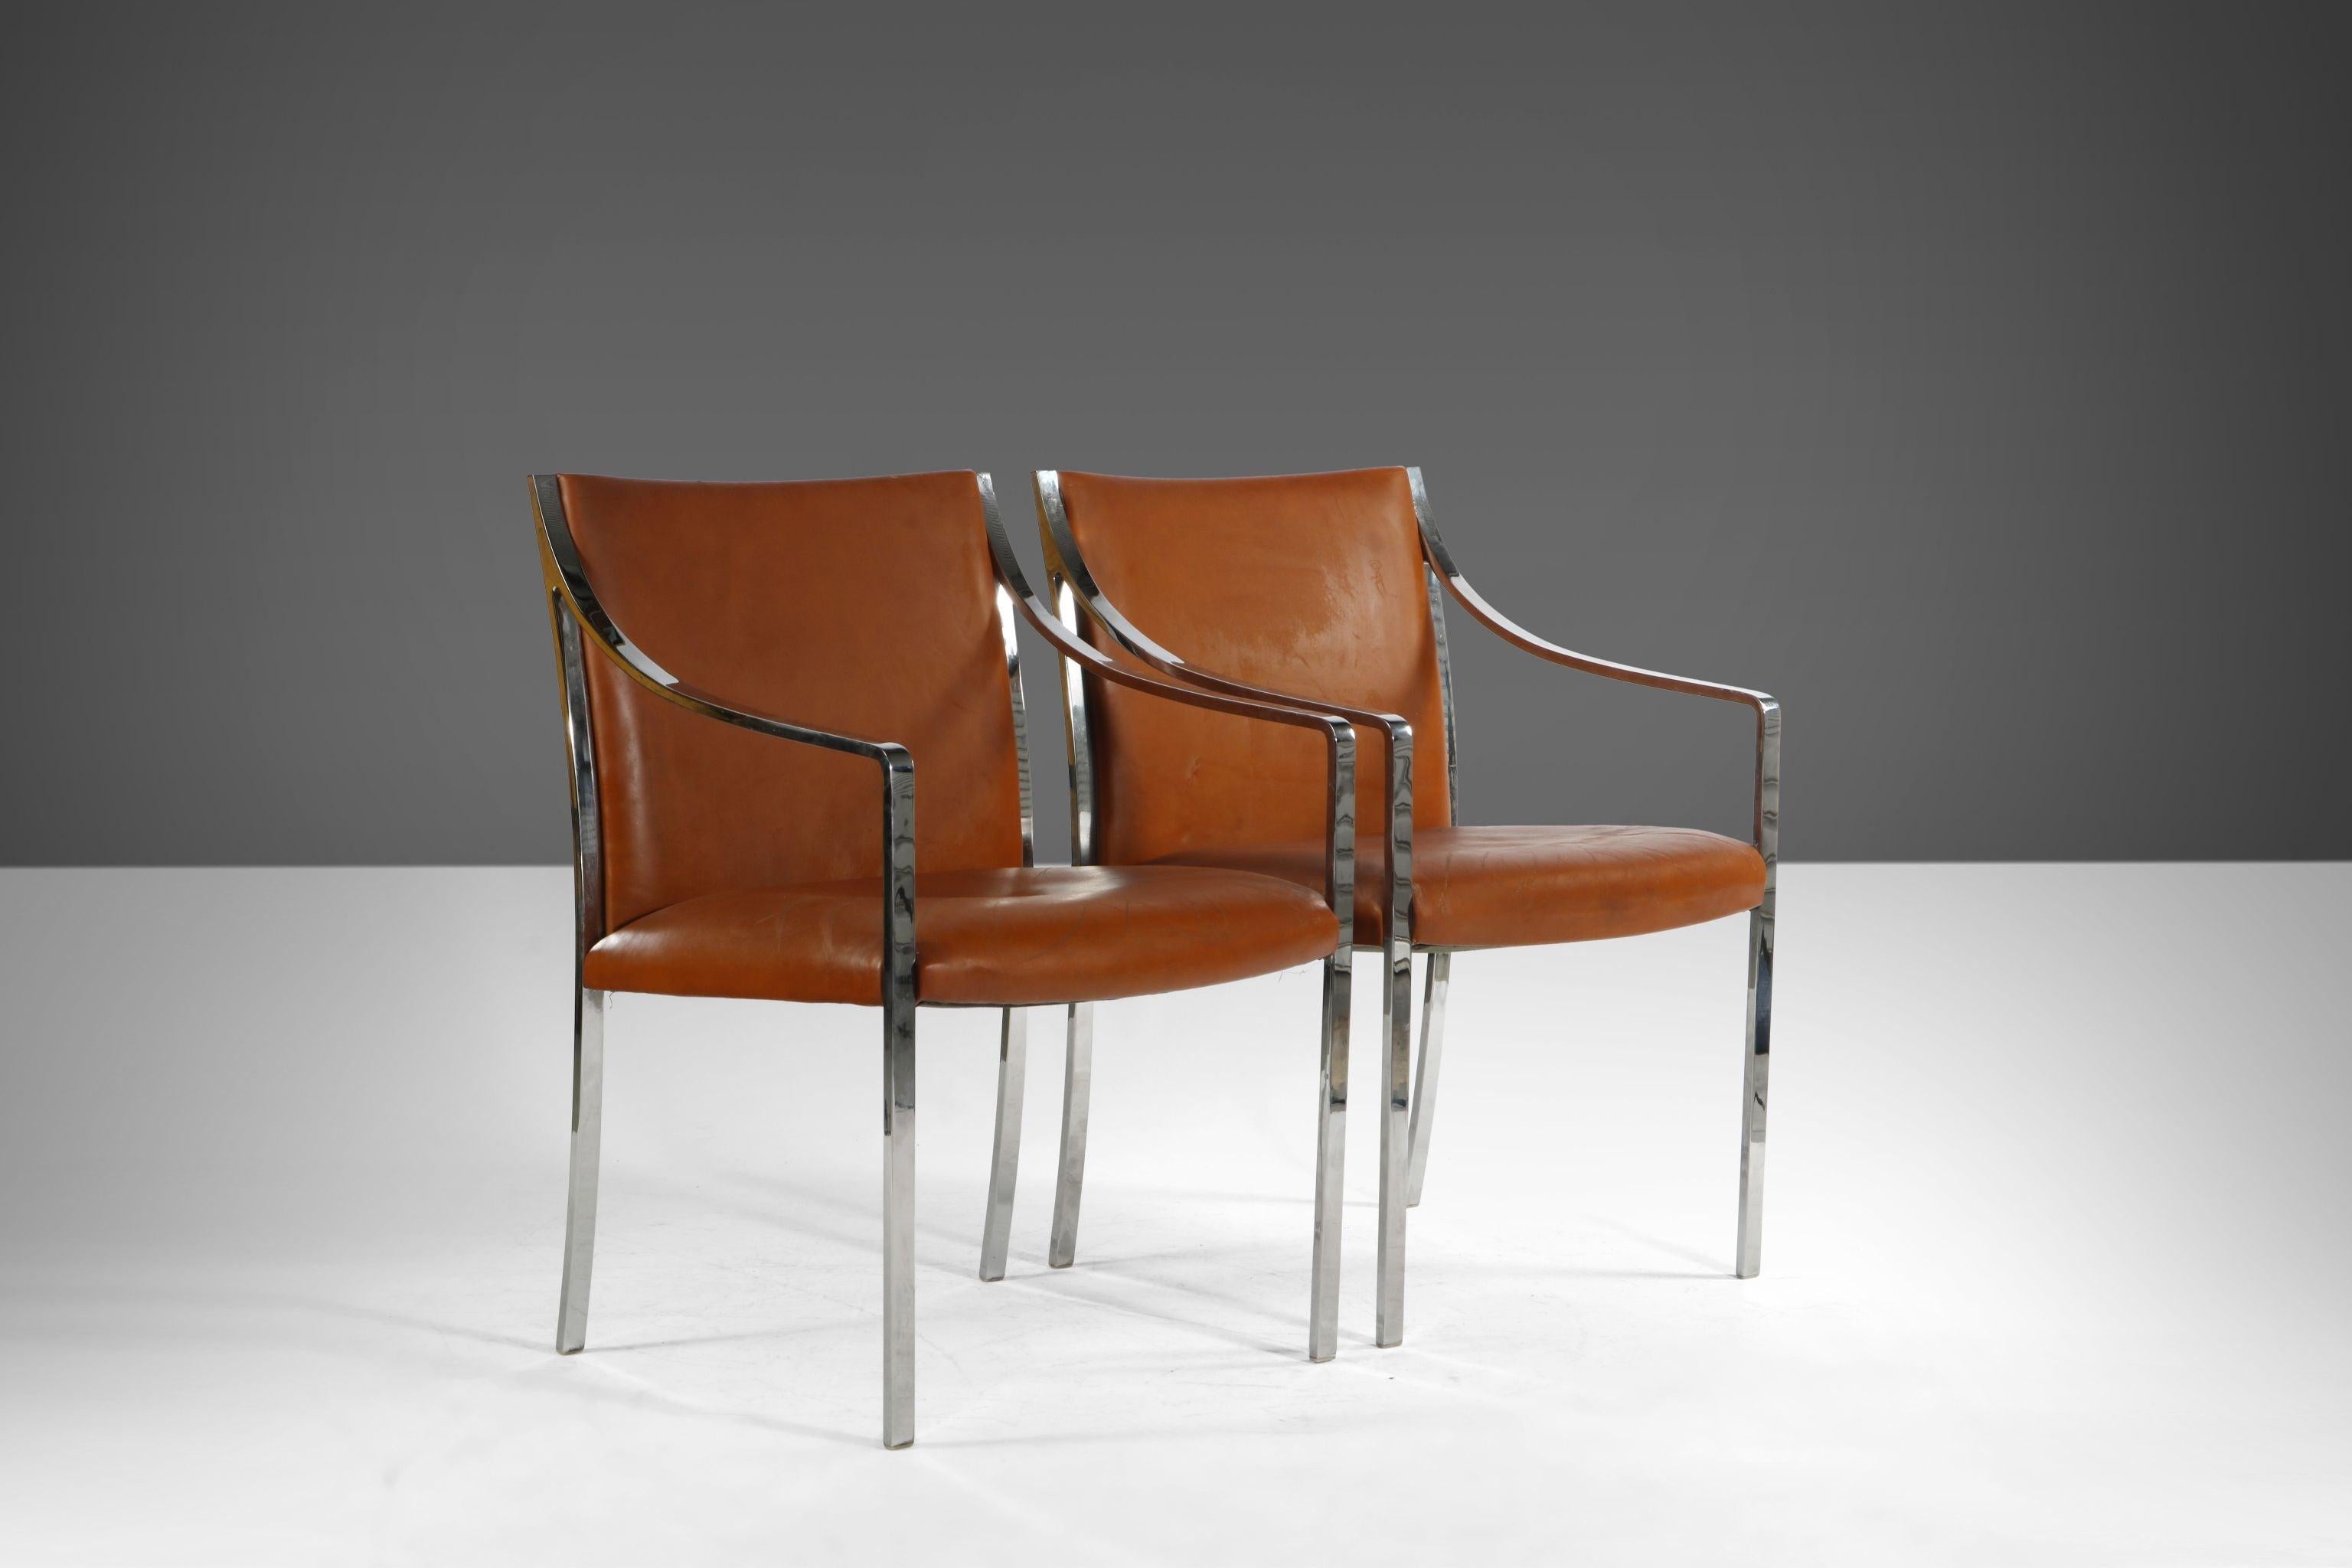 The set of chairs is constructed on an architectural chrome base with the original leatherette / Naugahyde seats. We offer re-upholstery services; please inquire prior to checkout if you are interested in this service. The design is exquisite and